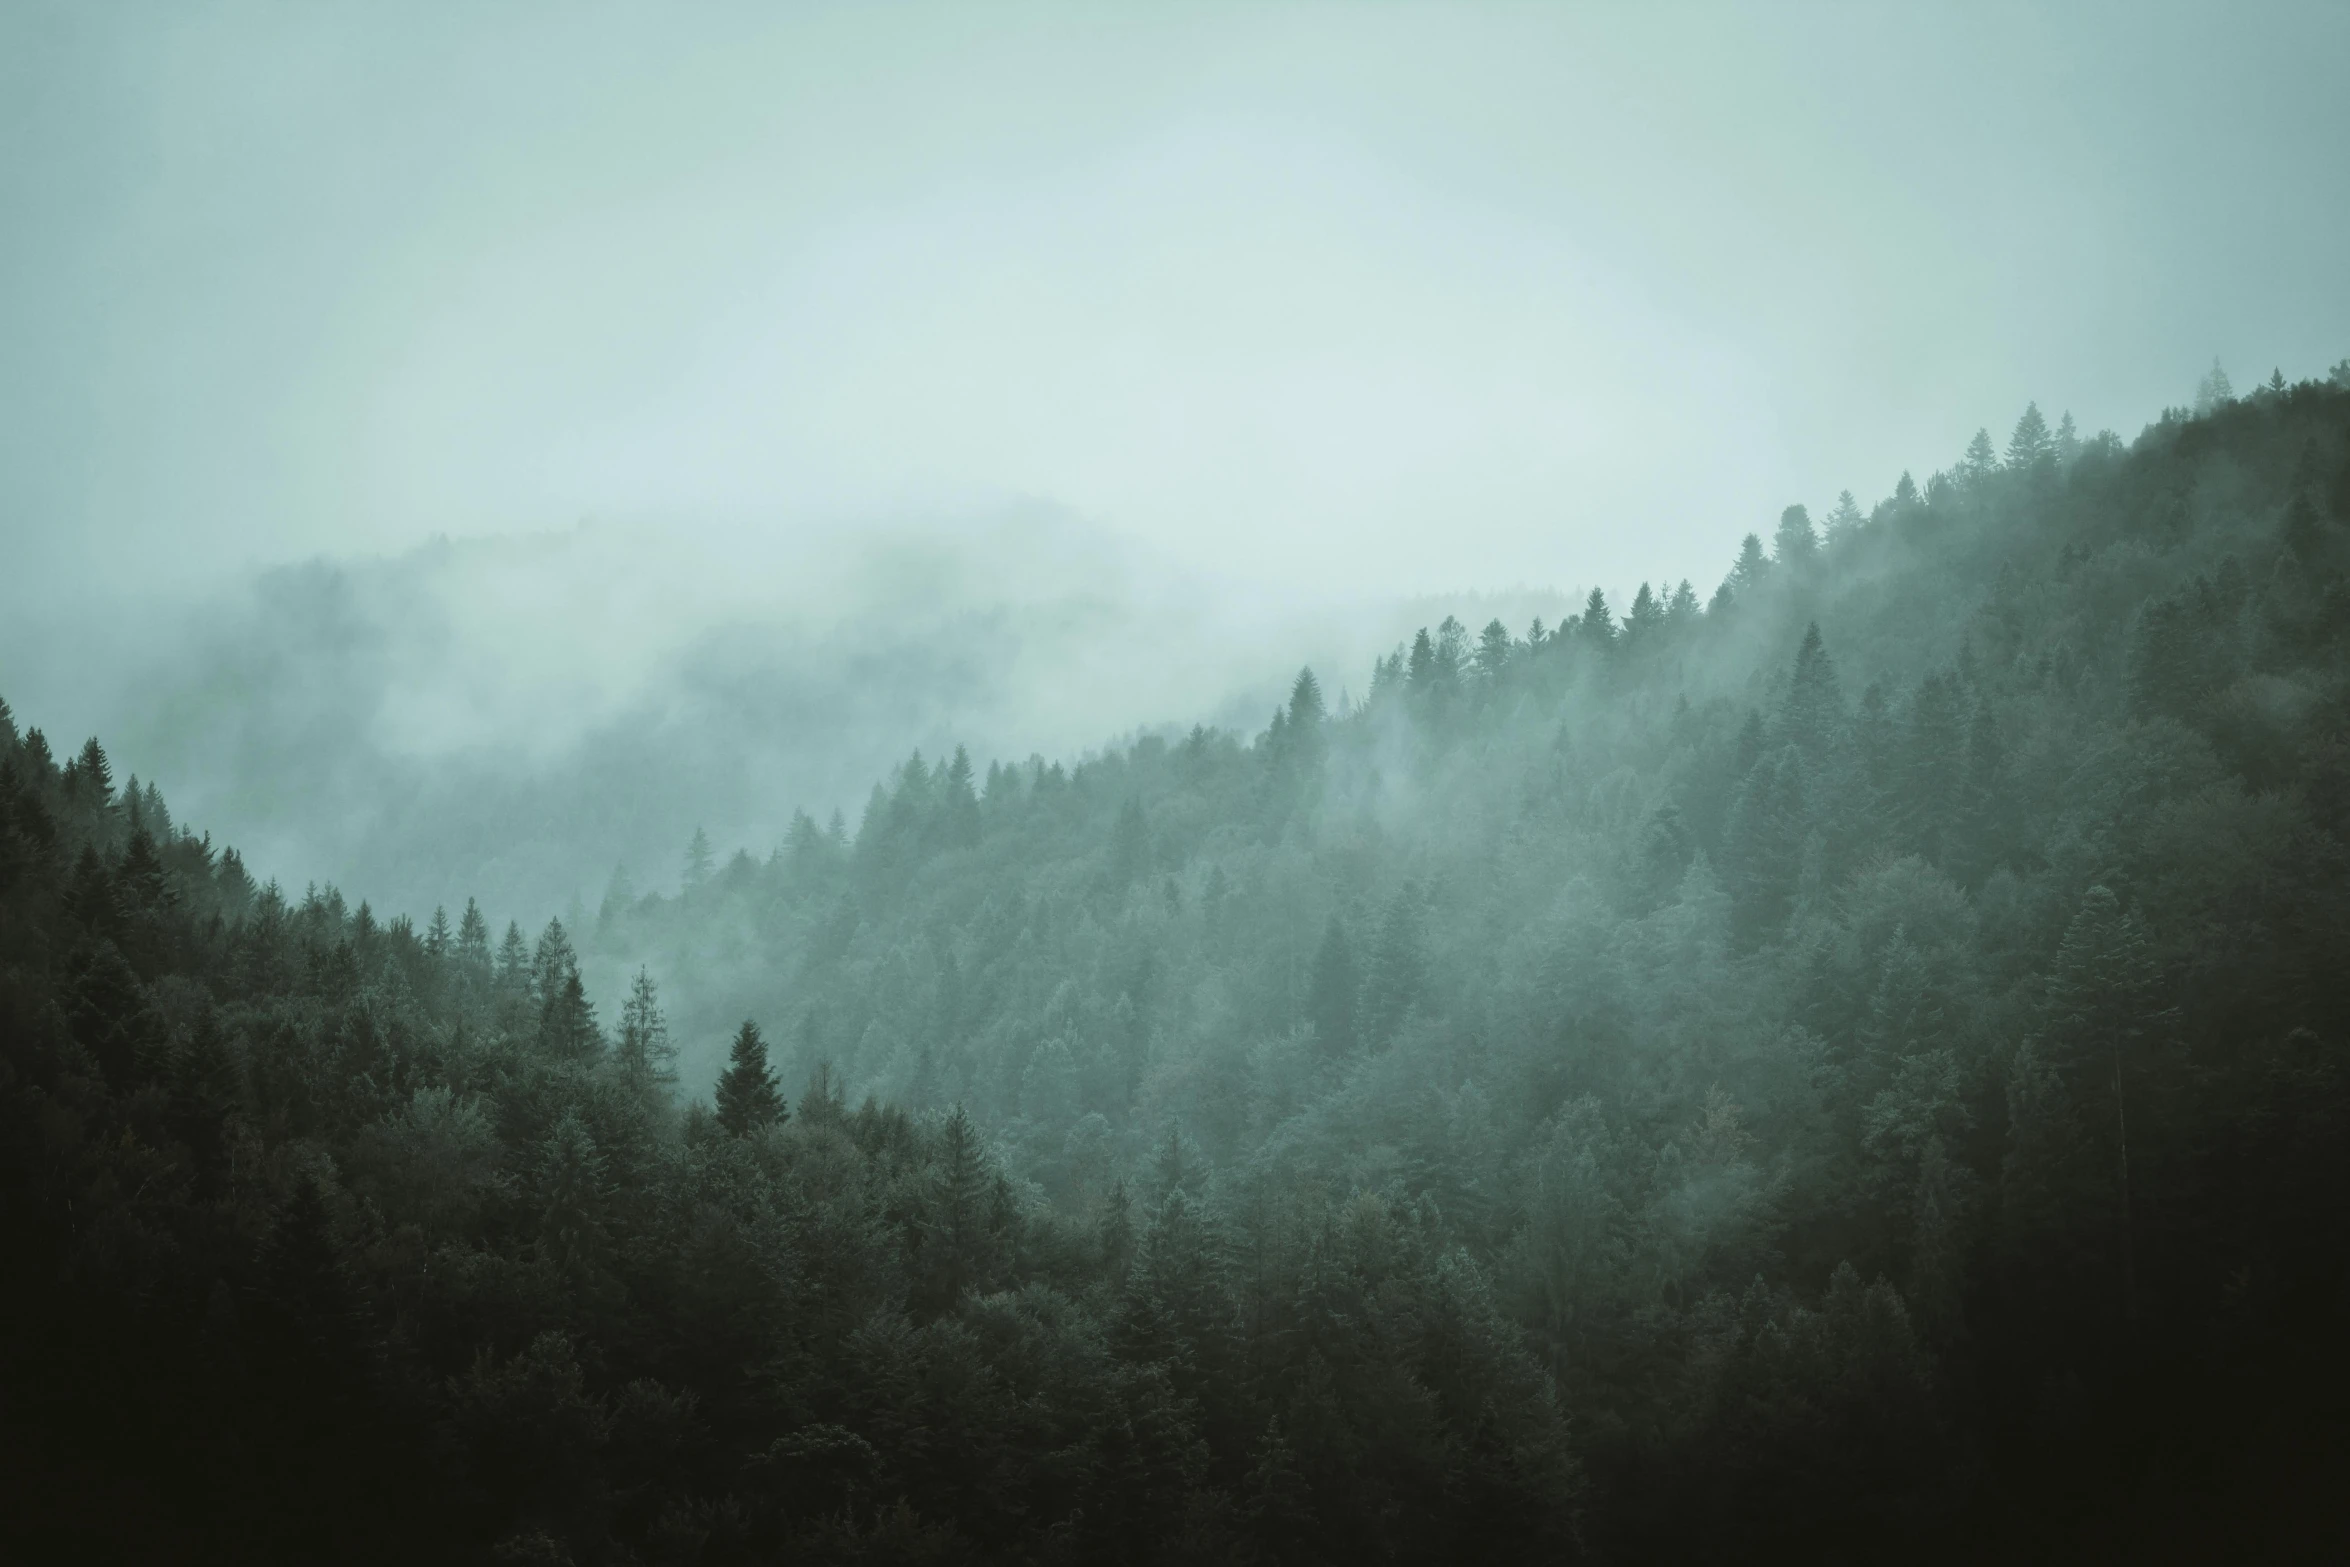 the mountains covered in trees are seen with fog